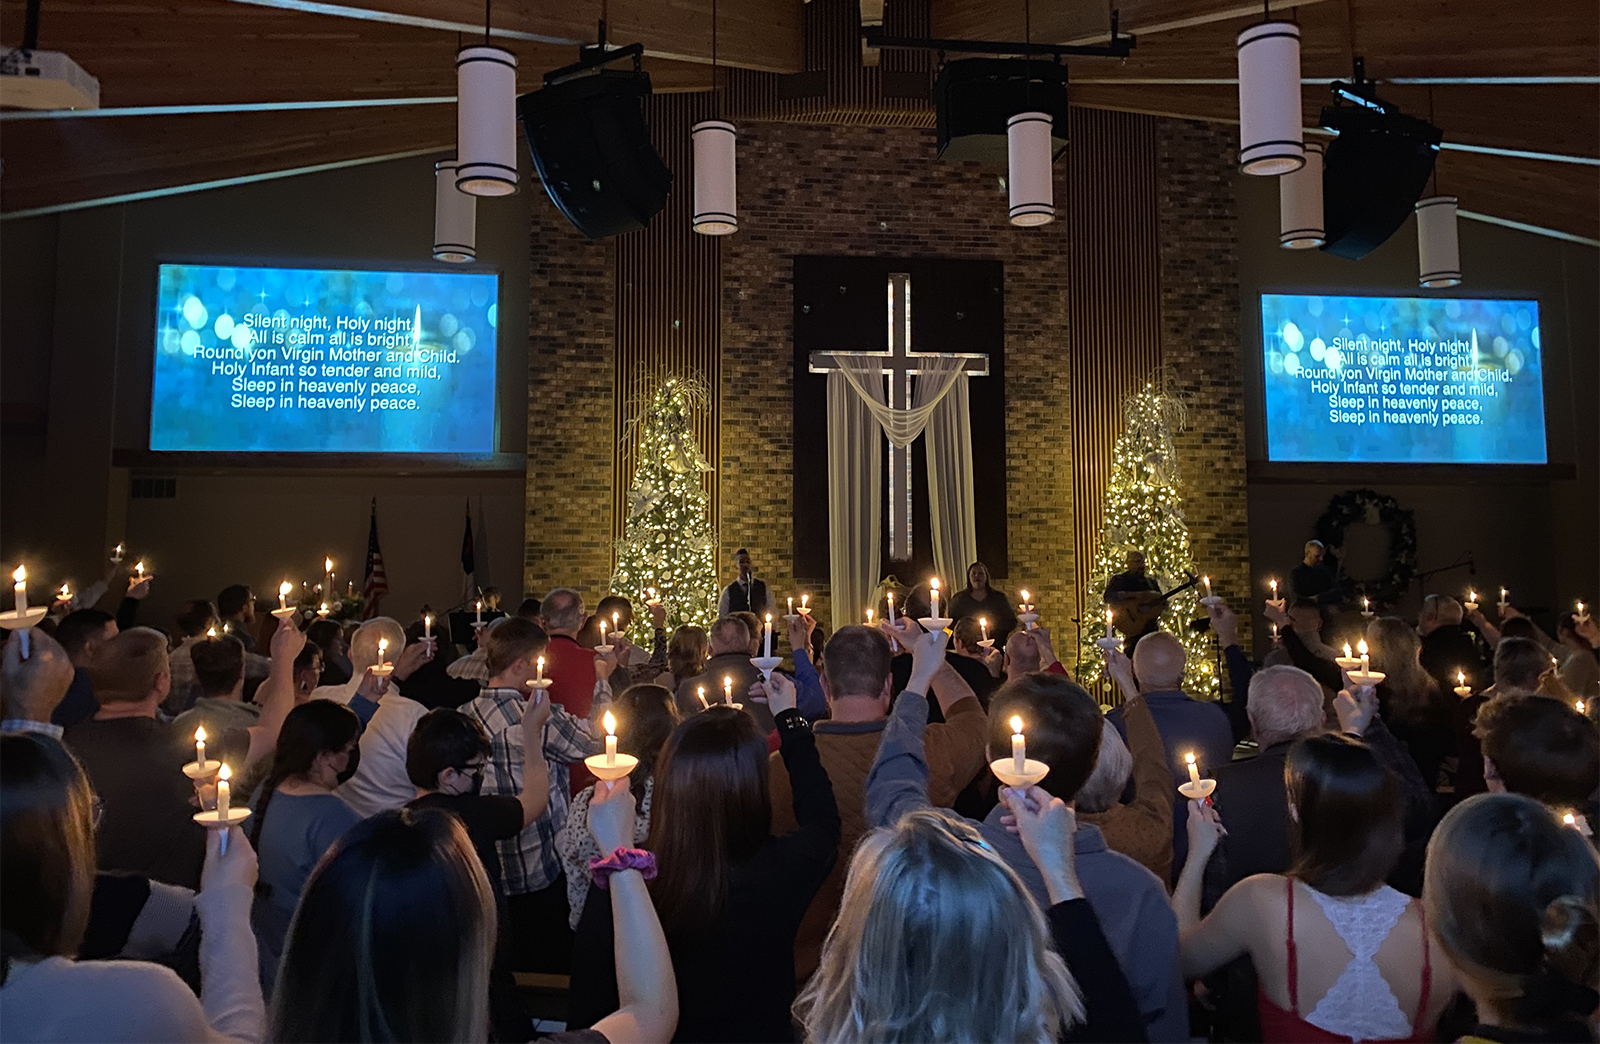 This Christmas, churches are preparing for a frenzy of festivity